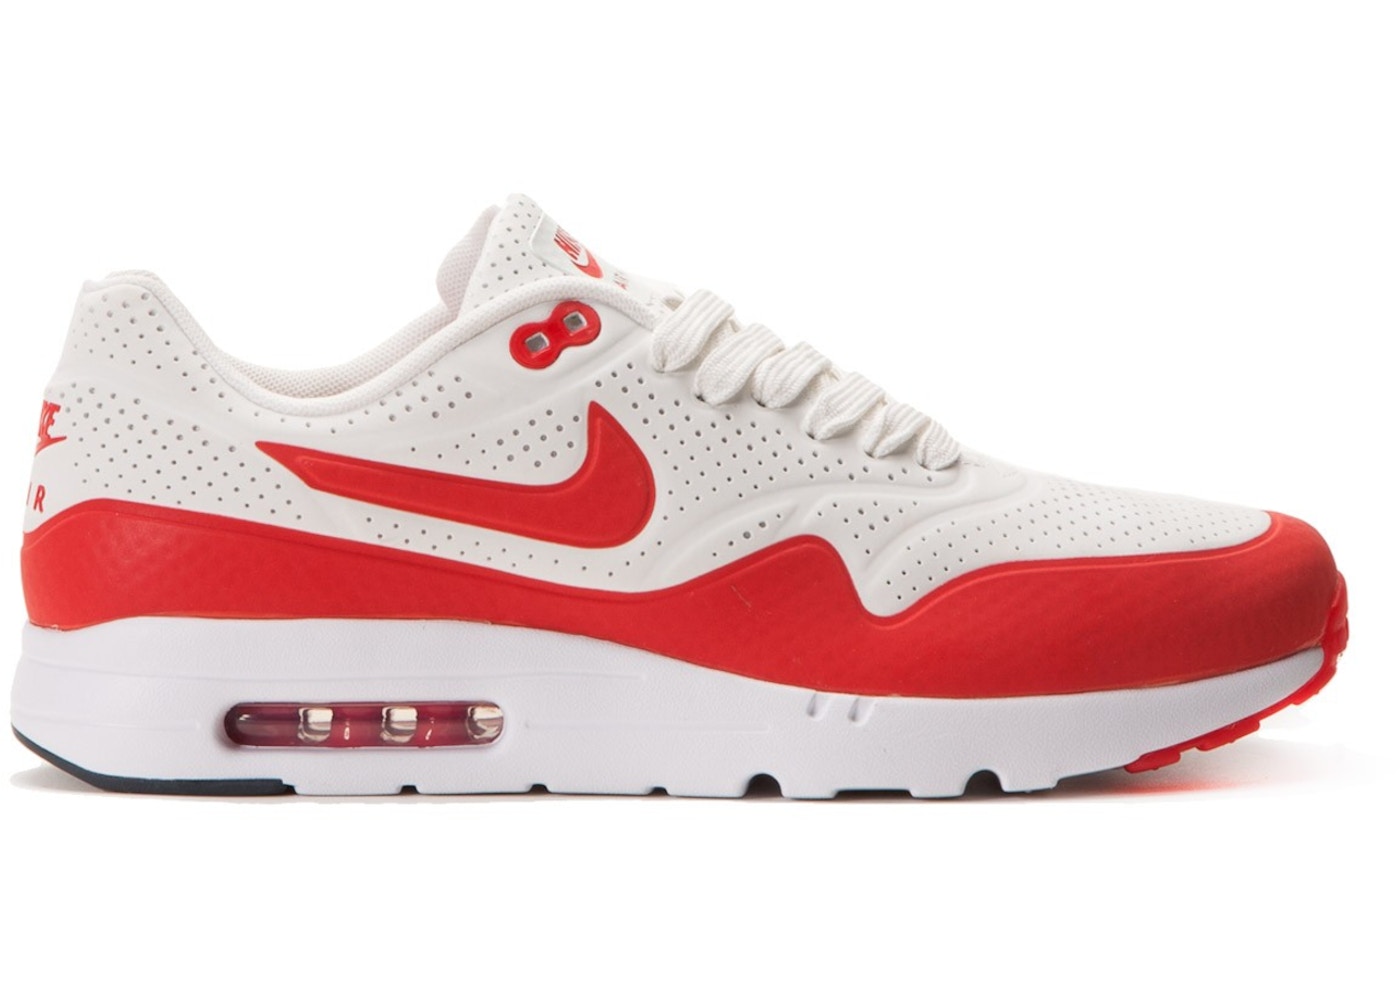 Nike Air Max 1 Ultra Moire Challenge Red